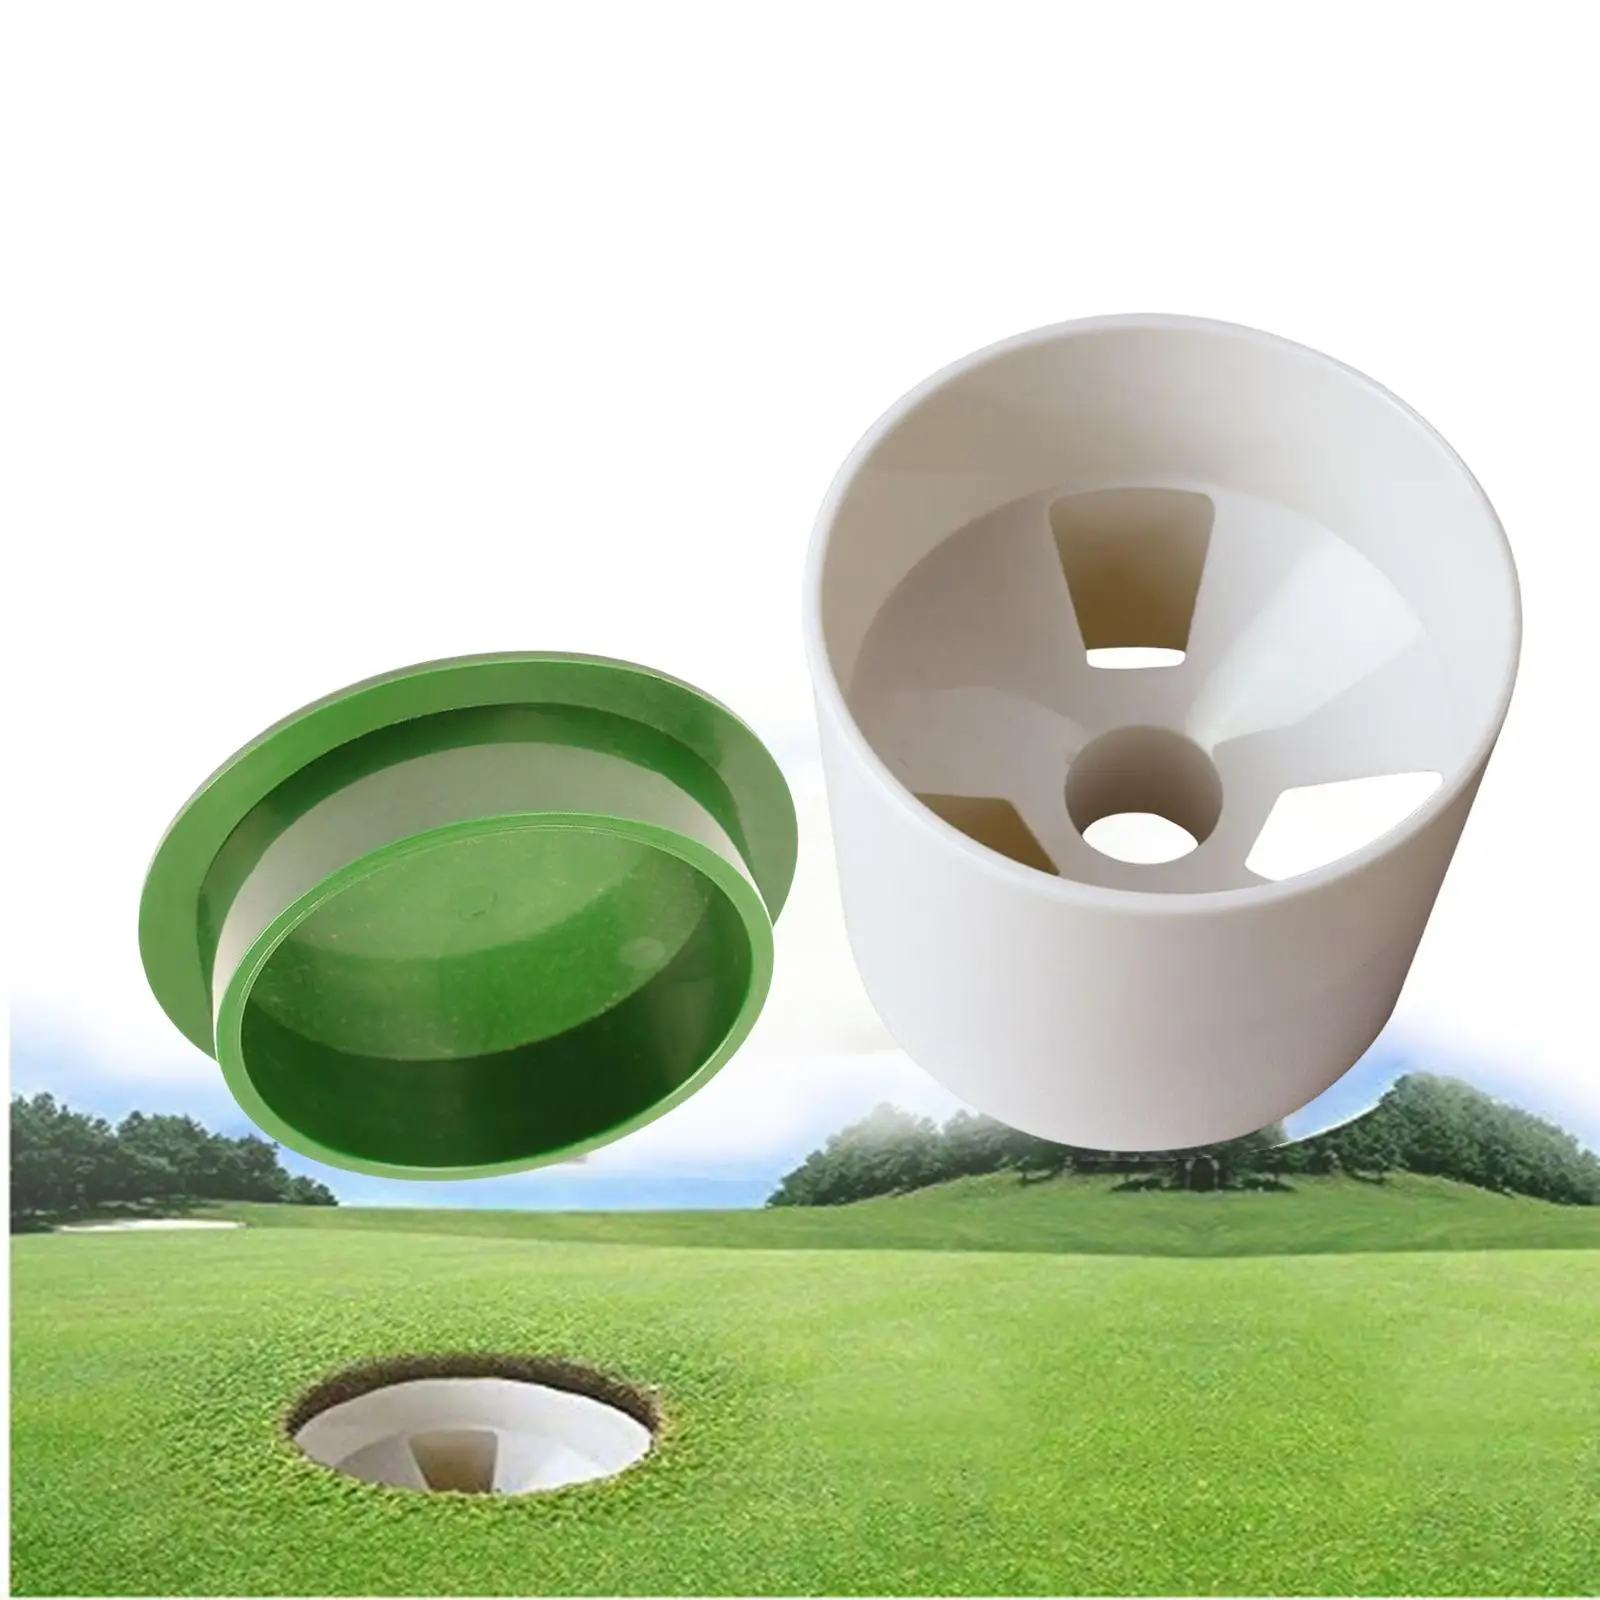  Cups with Lid for Practice Training Aid Backyard Accessories